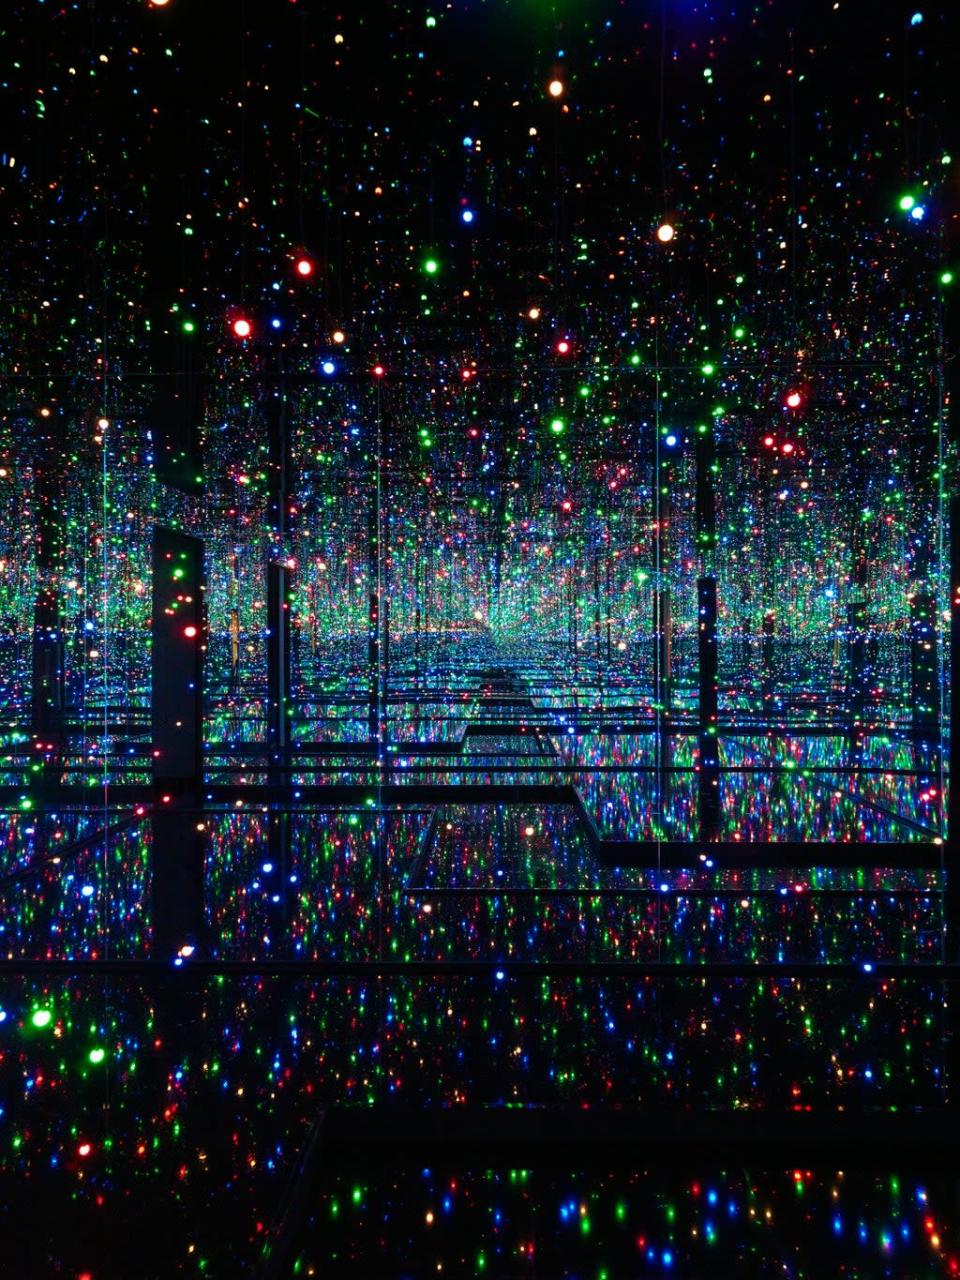 Infinity Mirrored Room - Filled with the Brilliance of Life, 2011/2017 (Yayoi Kusama)